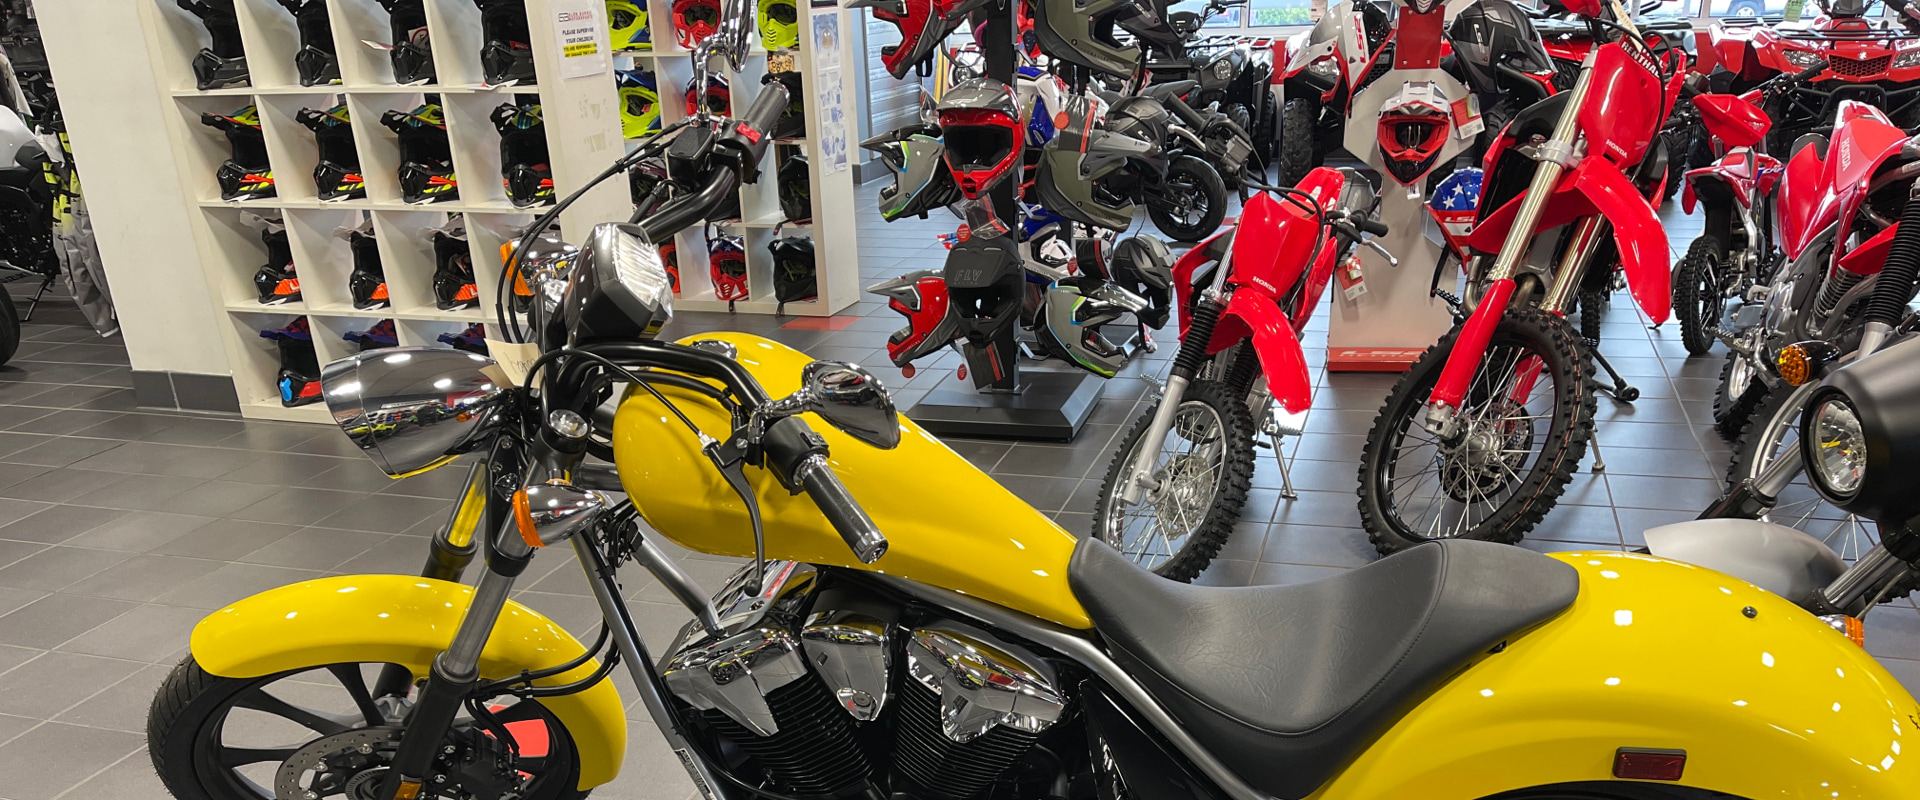 New Motorcycle Incentives: Making the Most of Your Maryland Motorcycle Purchase